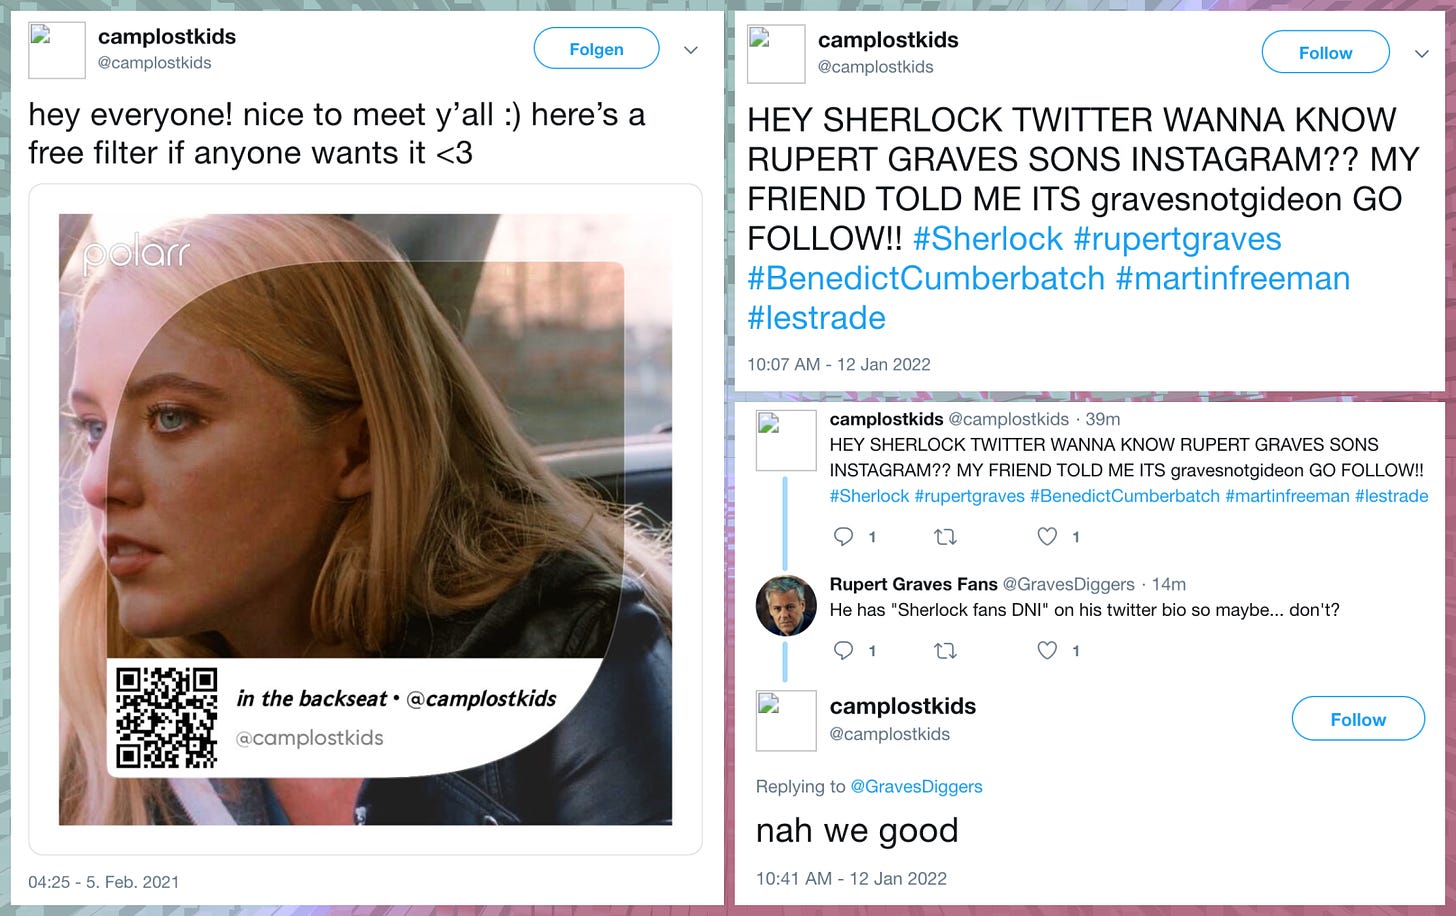 screenshots of @lubadovzhenko1/camplostkids' old content containing these three tweets:  "hey everyone! nice to mee y'all :) here's a free filter if anyone wants it <3"  "HEY SHERLOCK TWITTER WANNA KNOW RUPERT GRAVES SONS INSTAGRAM?? MY FRIEND TOLD ME ITS gravesnotgideon GO FOLLOW!! #Sherlock #rupertgraves #BenedictCumberbatch #martinfreeman #lestrade"  "nah we good"